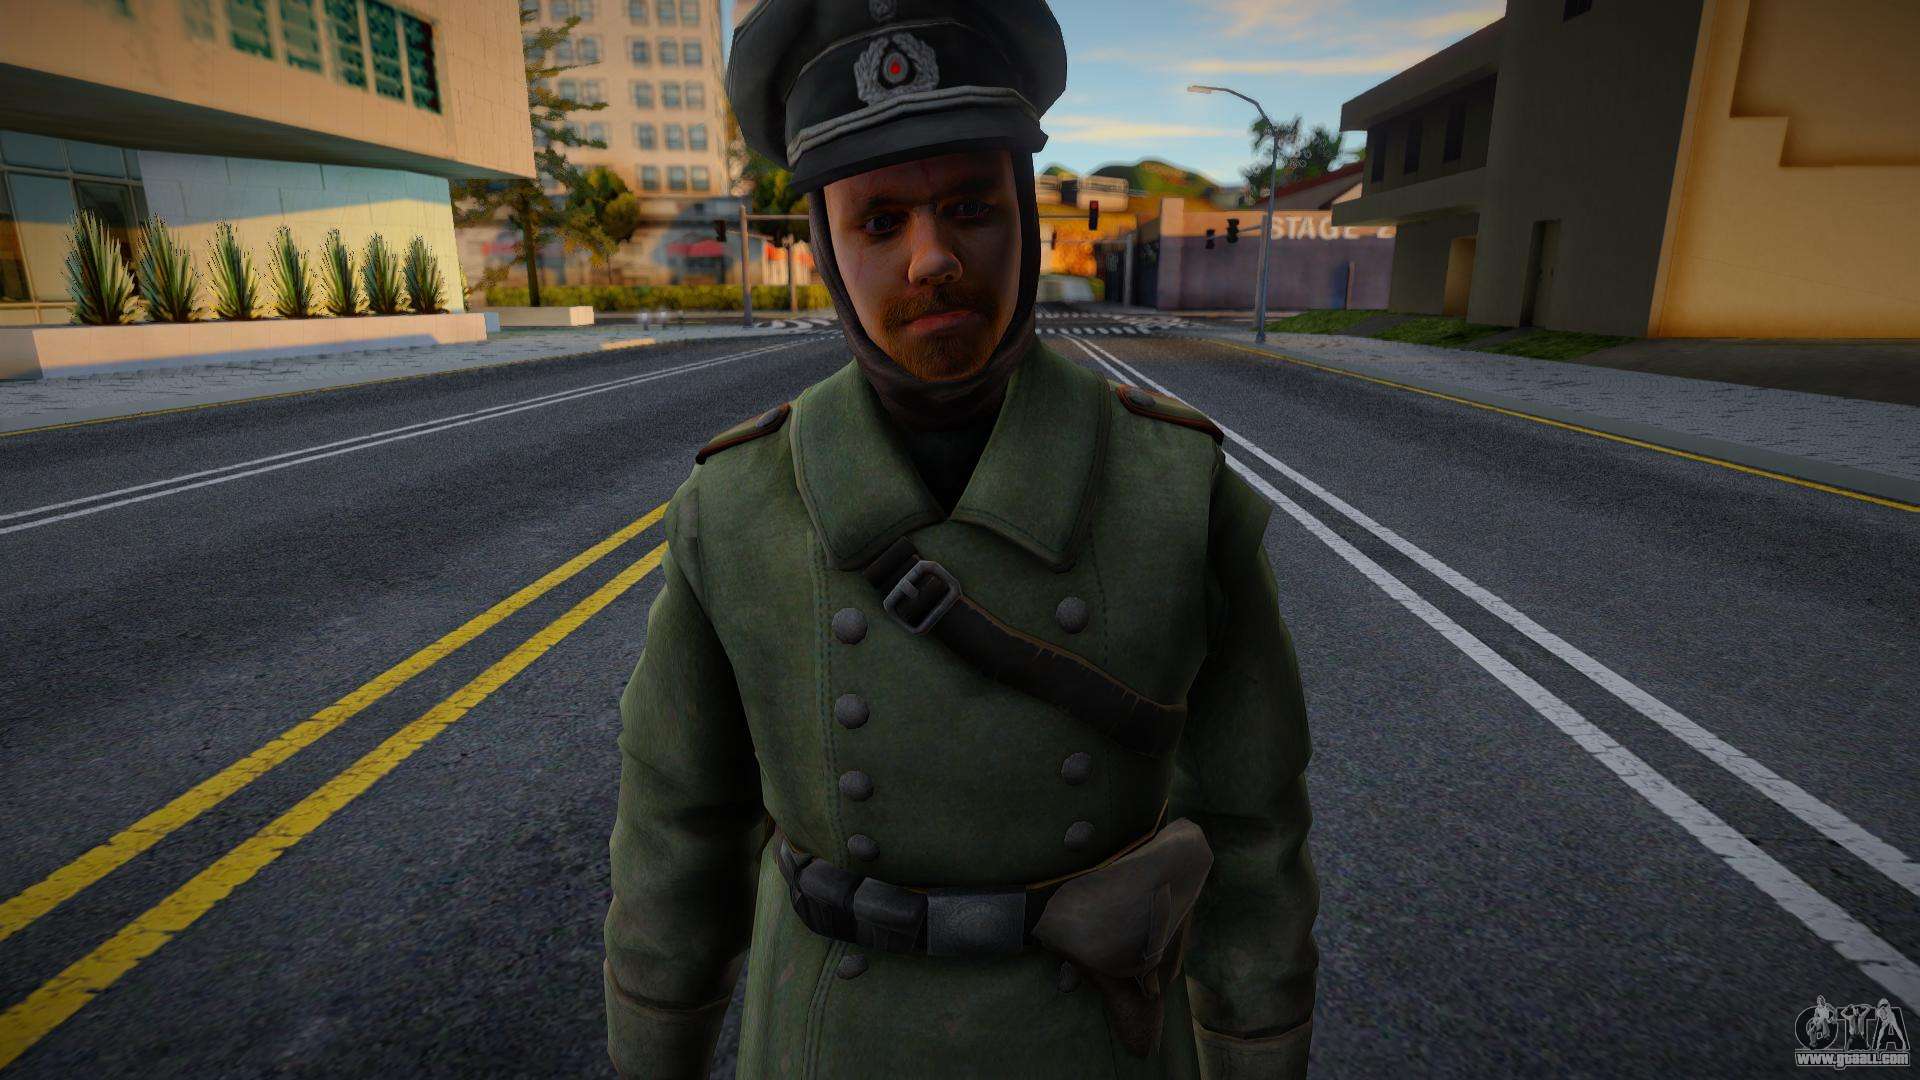 Wehrmacht Officer (Winter) for GTA San Andreas